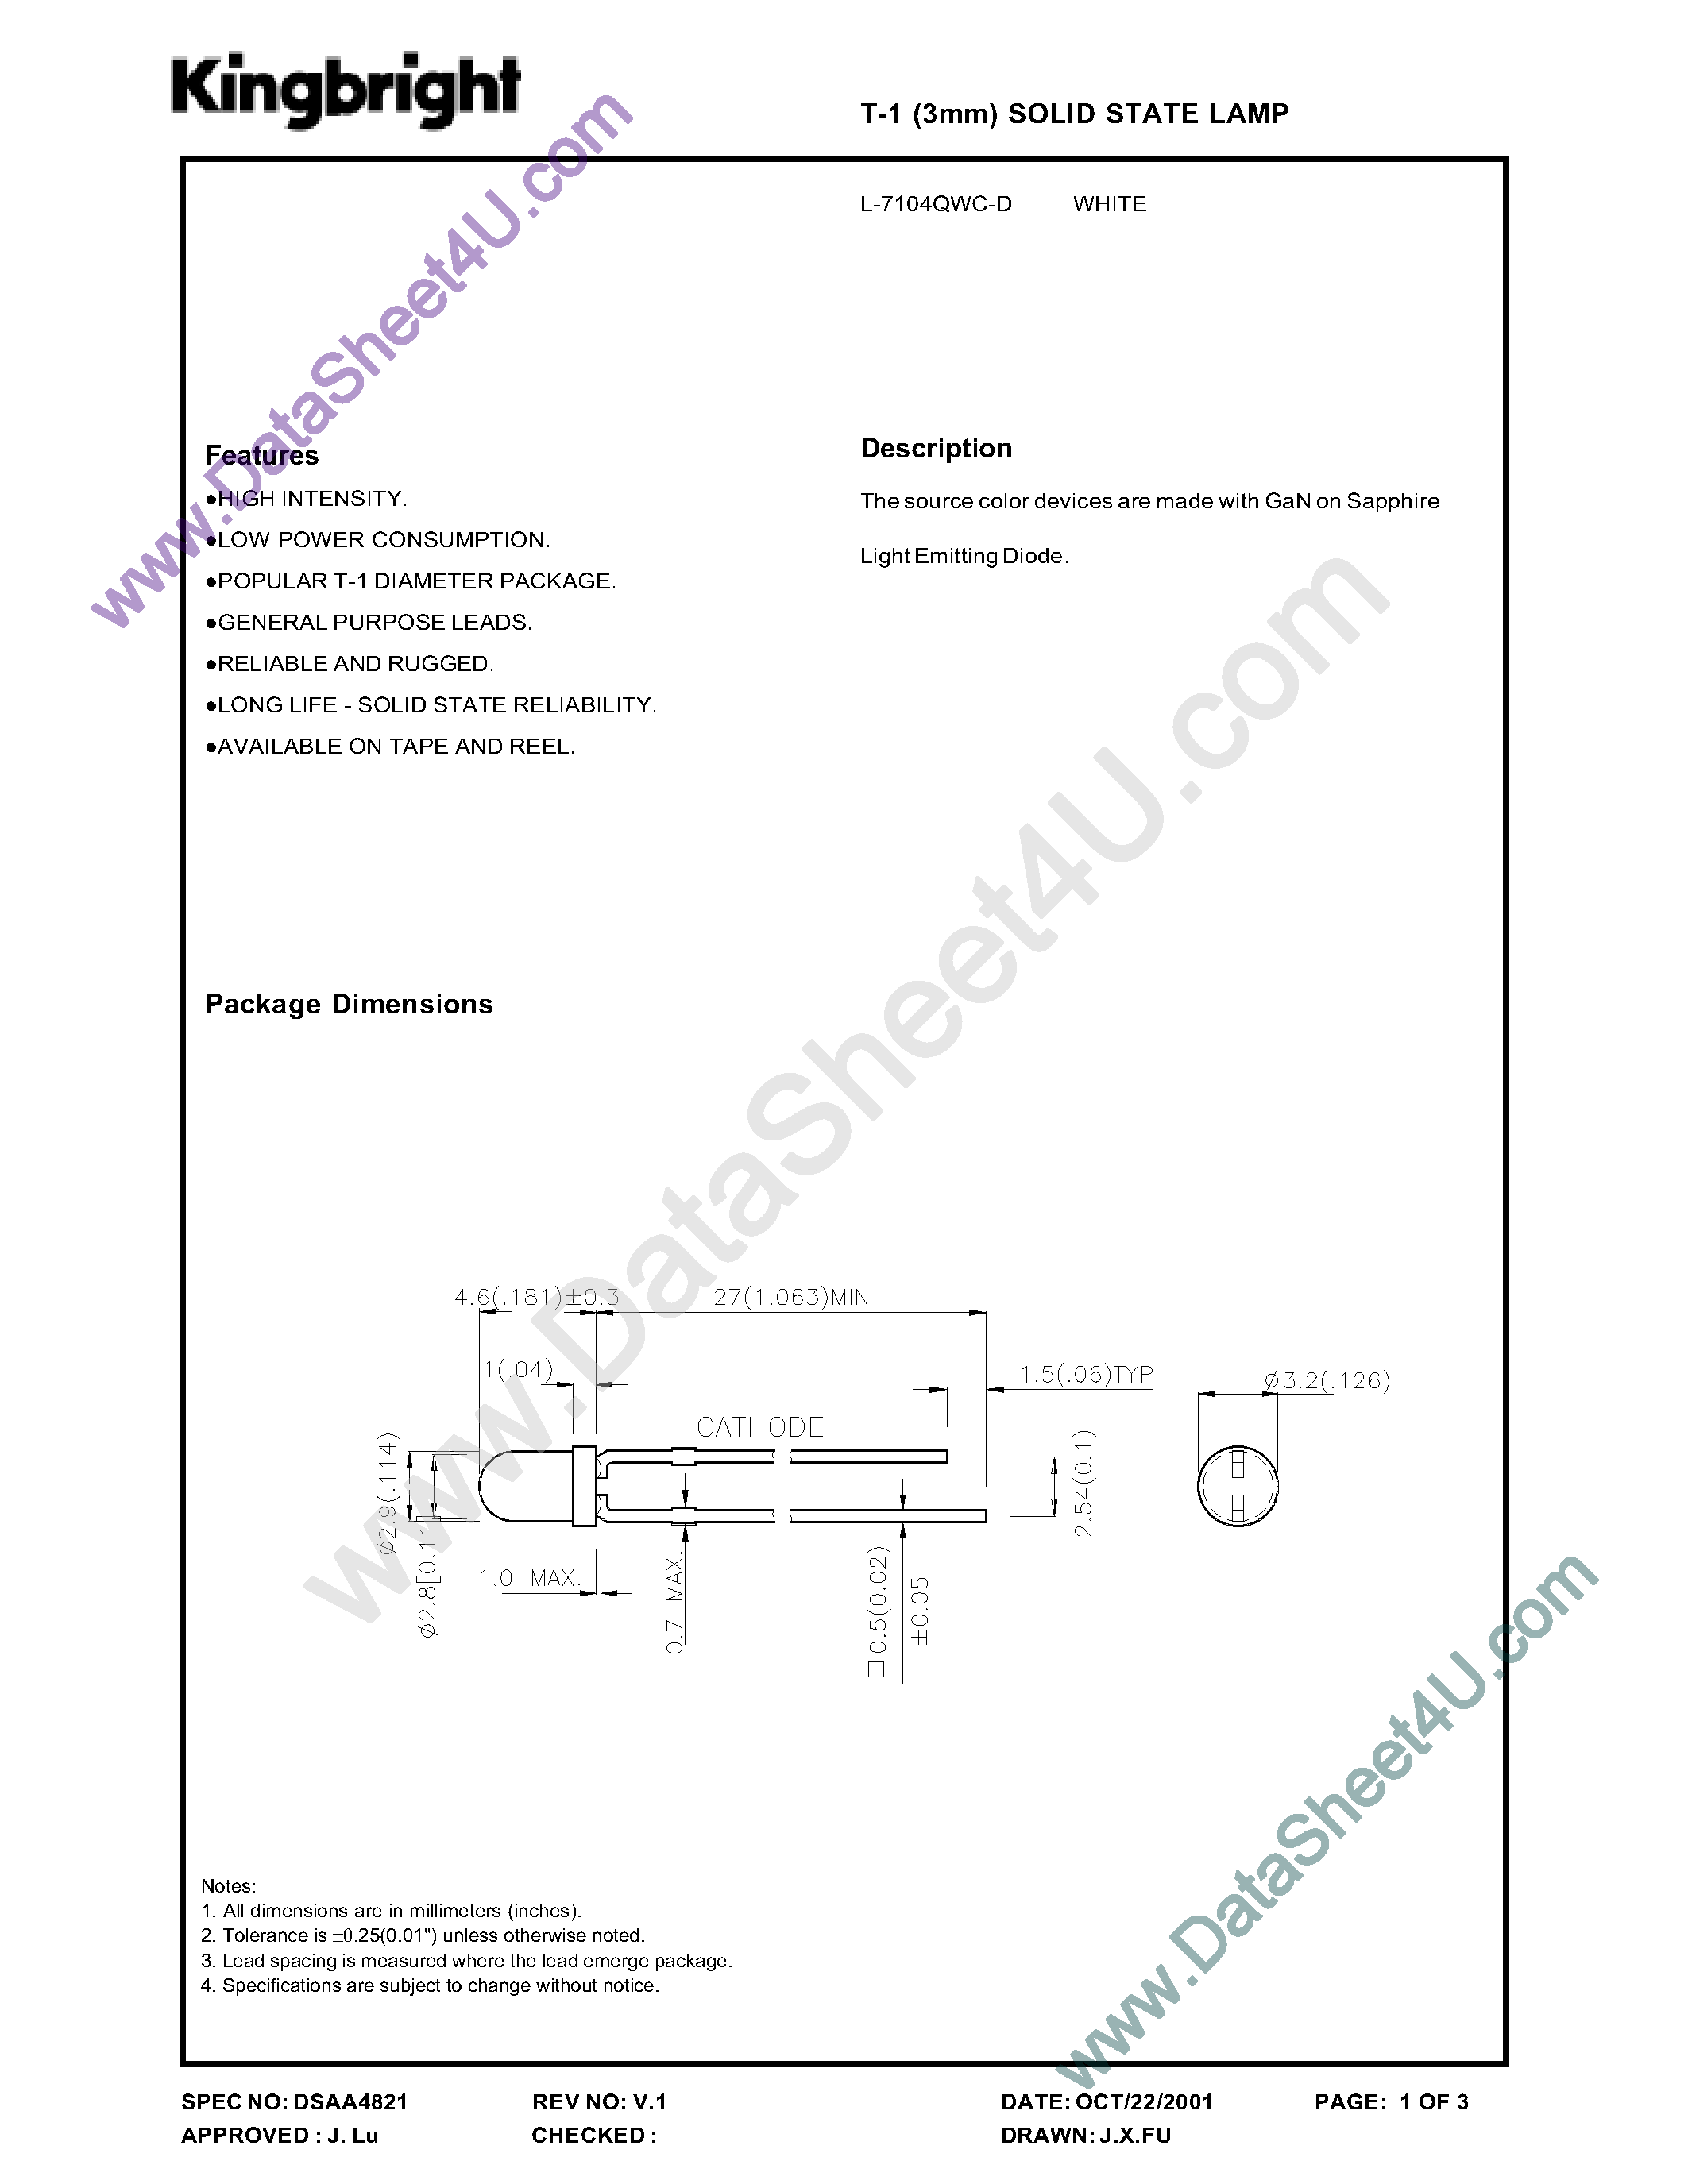 Datasheet L-7104QWC-D - Solid State Lamp page 1